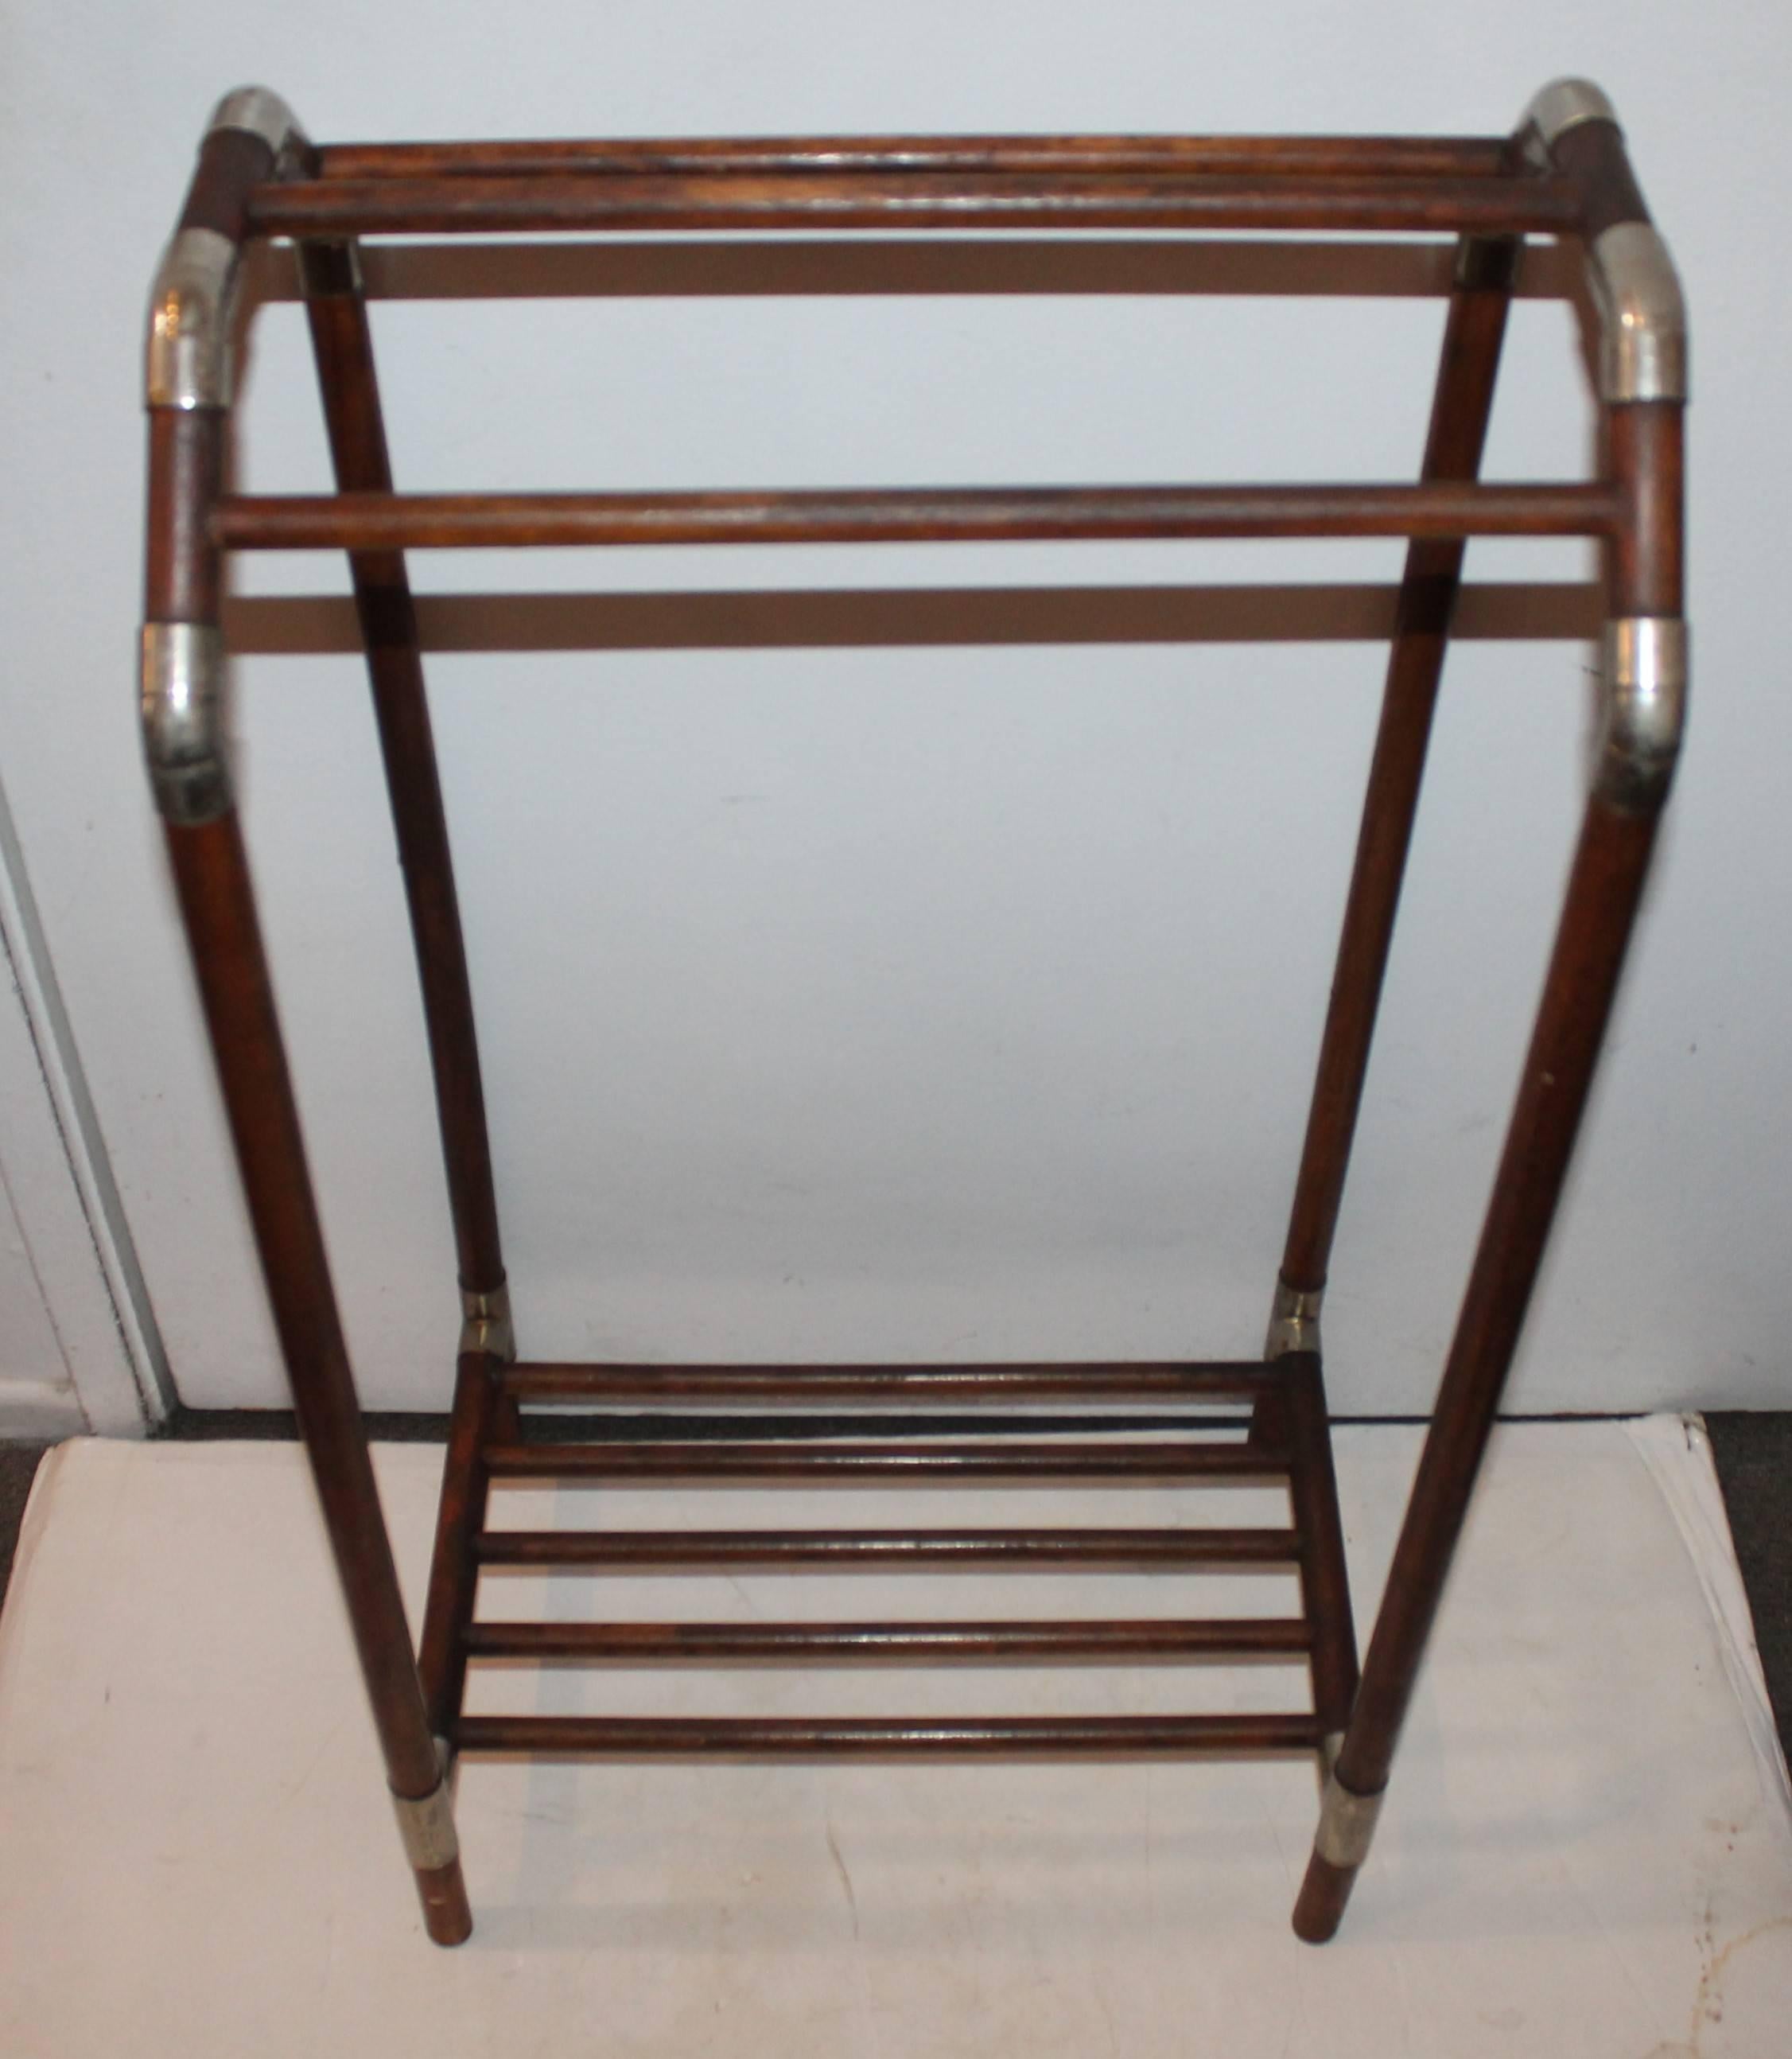 Hand-Crafted 19th Century Industrial Luggage Rack from a Train Station